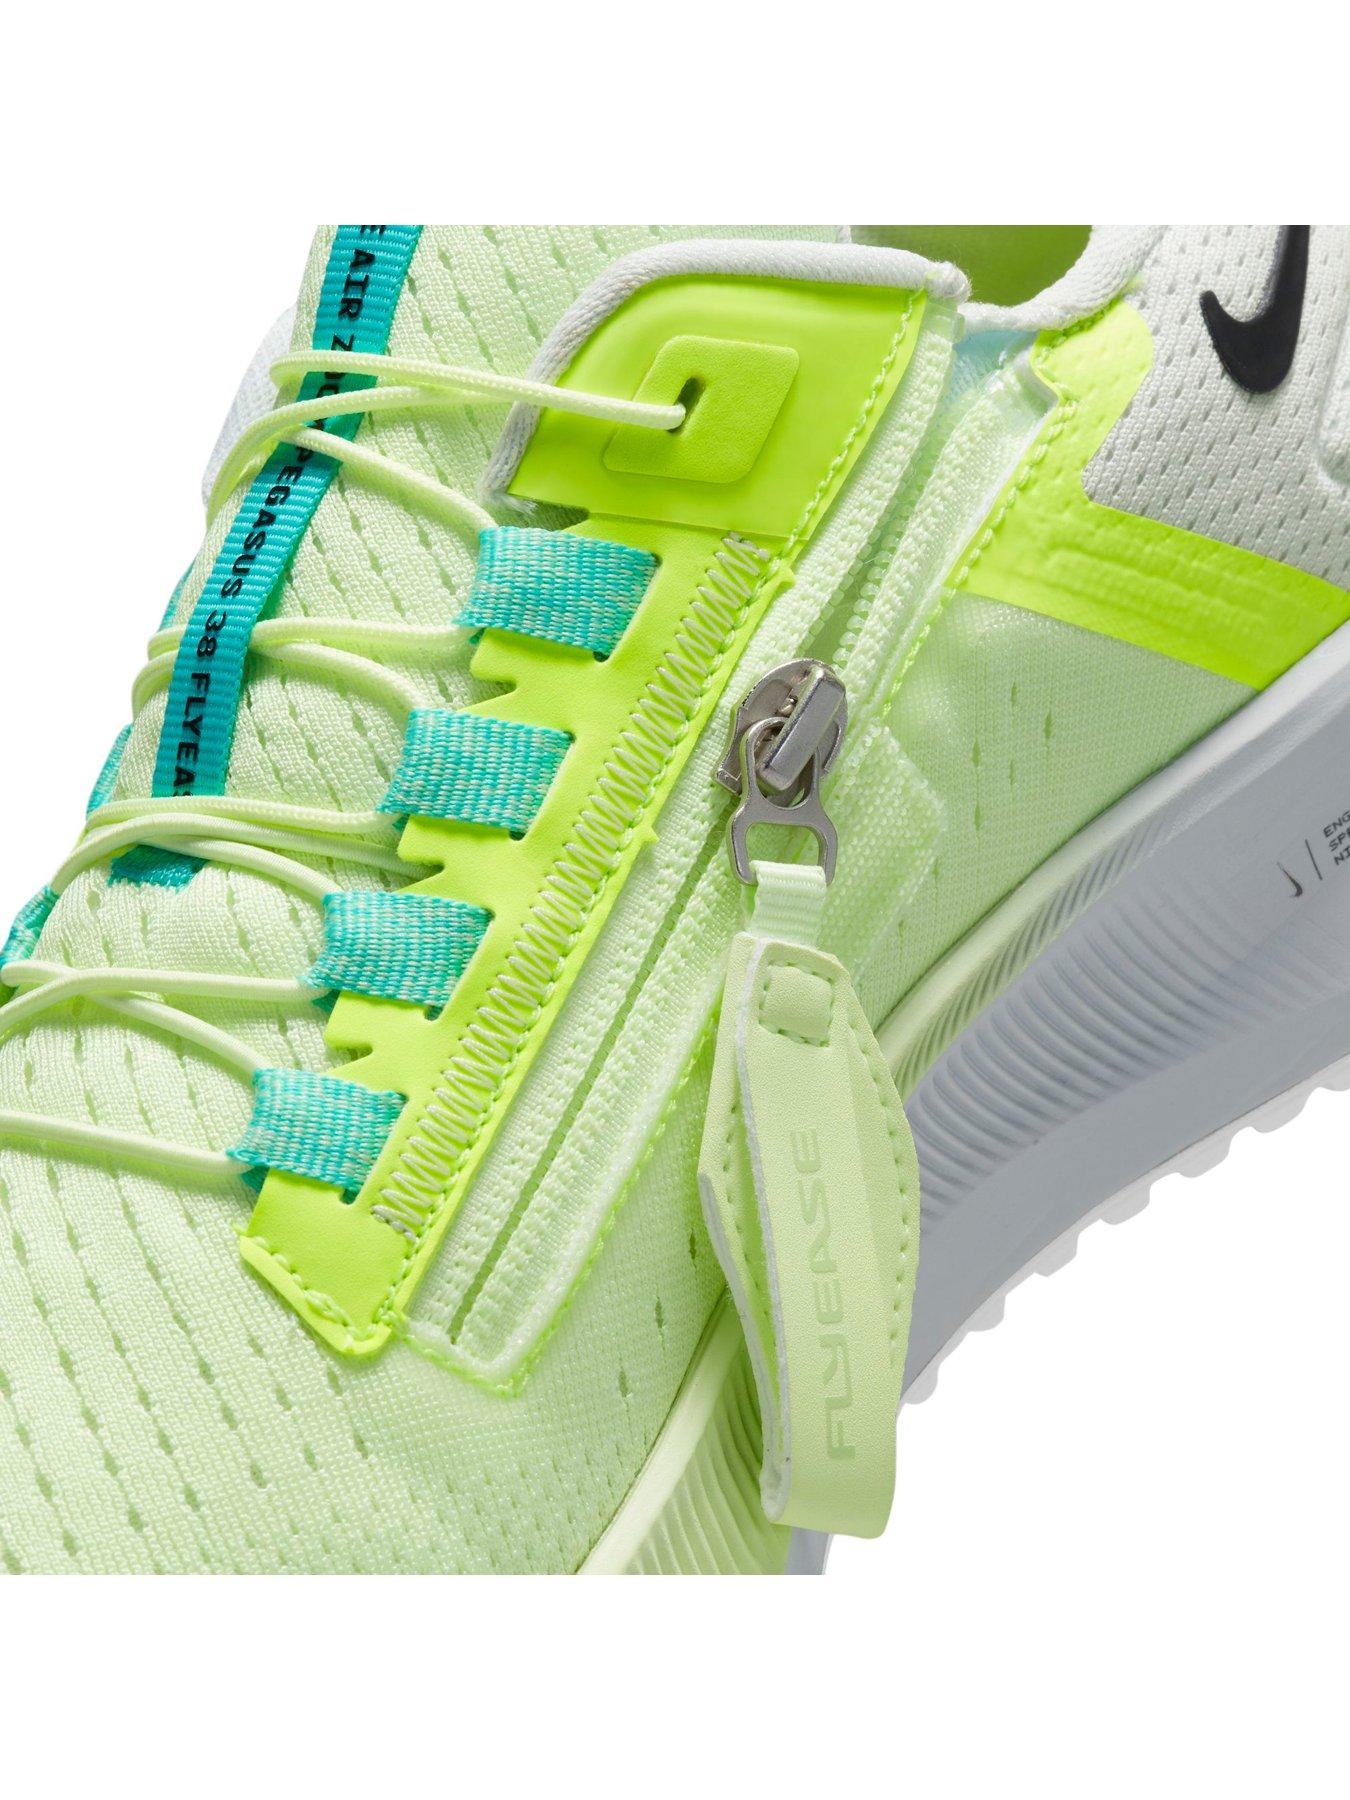 Trainers Air Zoom Pegasus 38 FlyEase - Volt/White